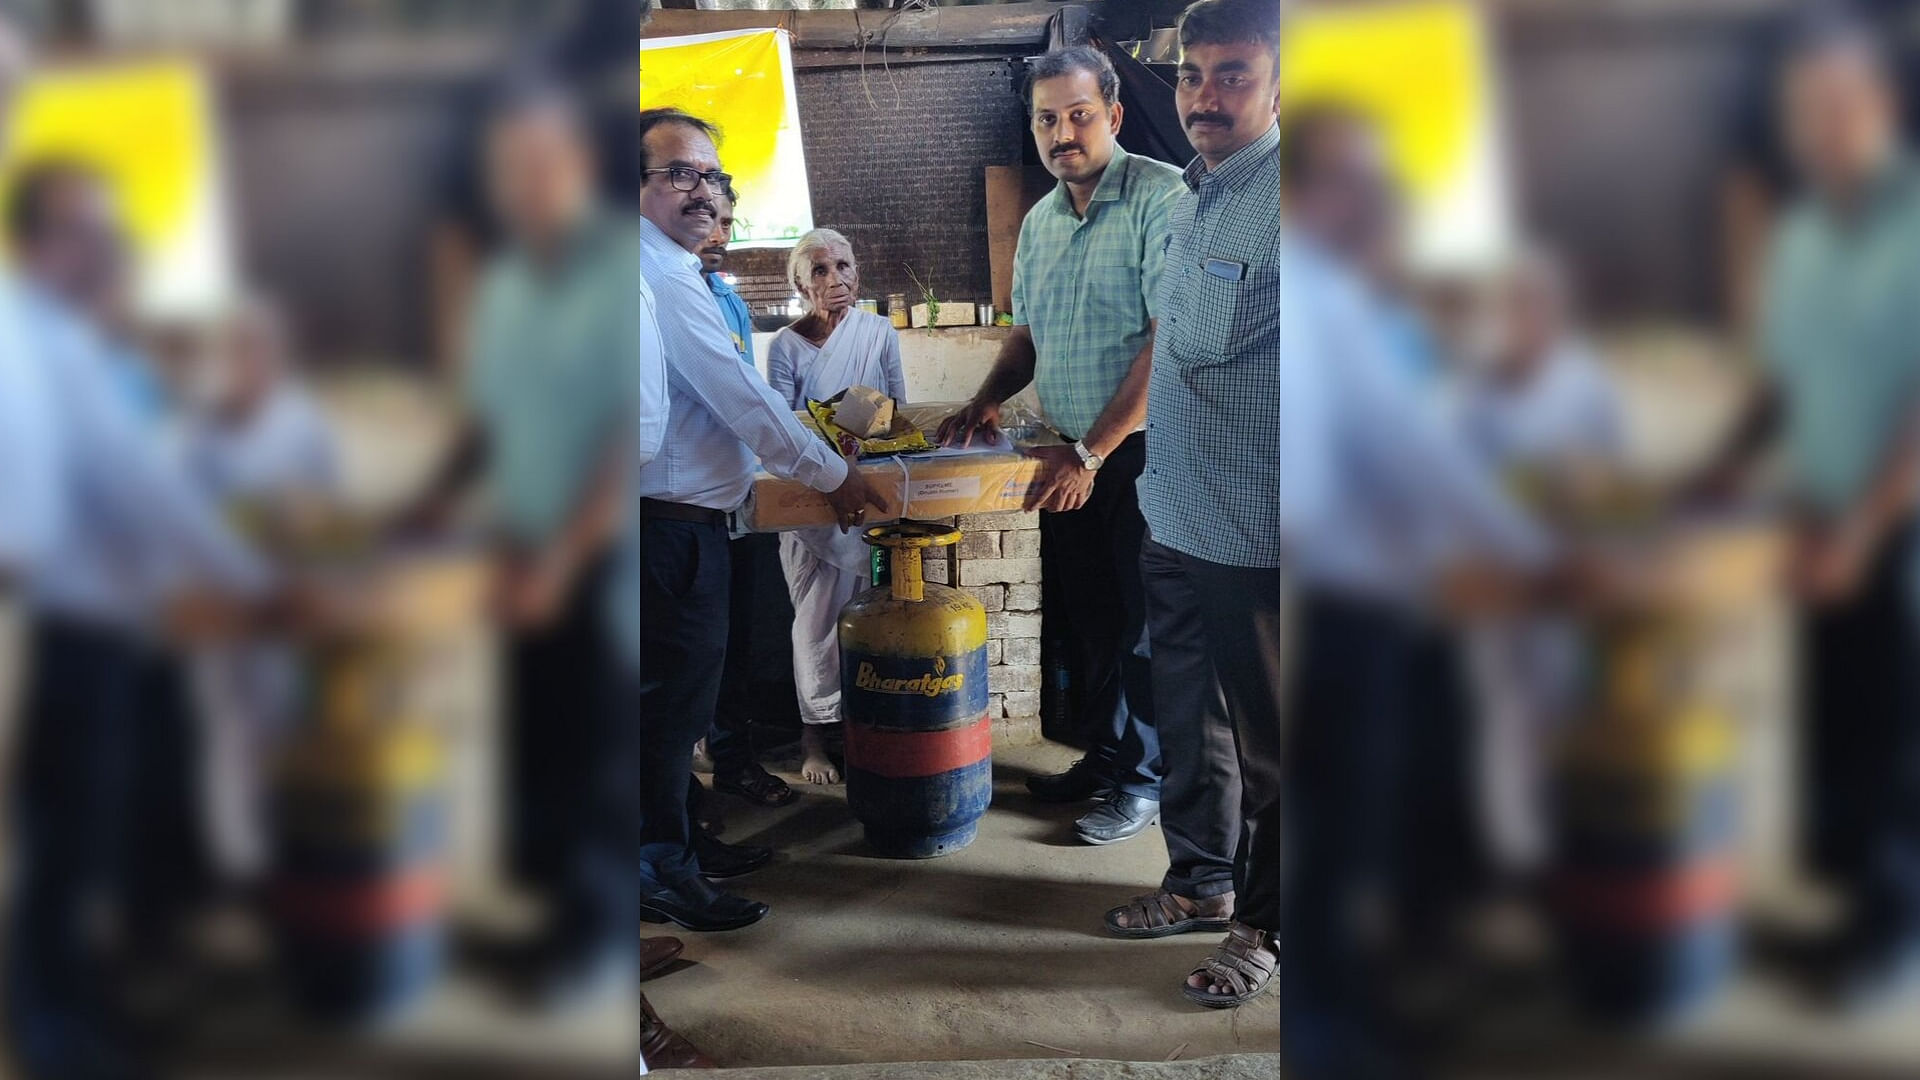 At the intervention of Petroleum Minister Dharmendra Pradhan, Bharat Gas provided K Kamalathal a cooking gas connection.